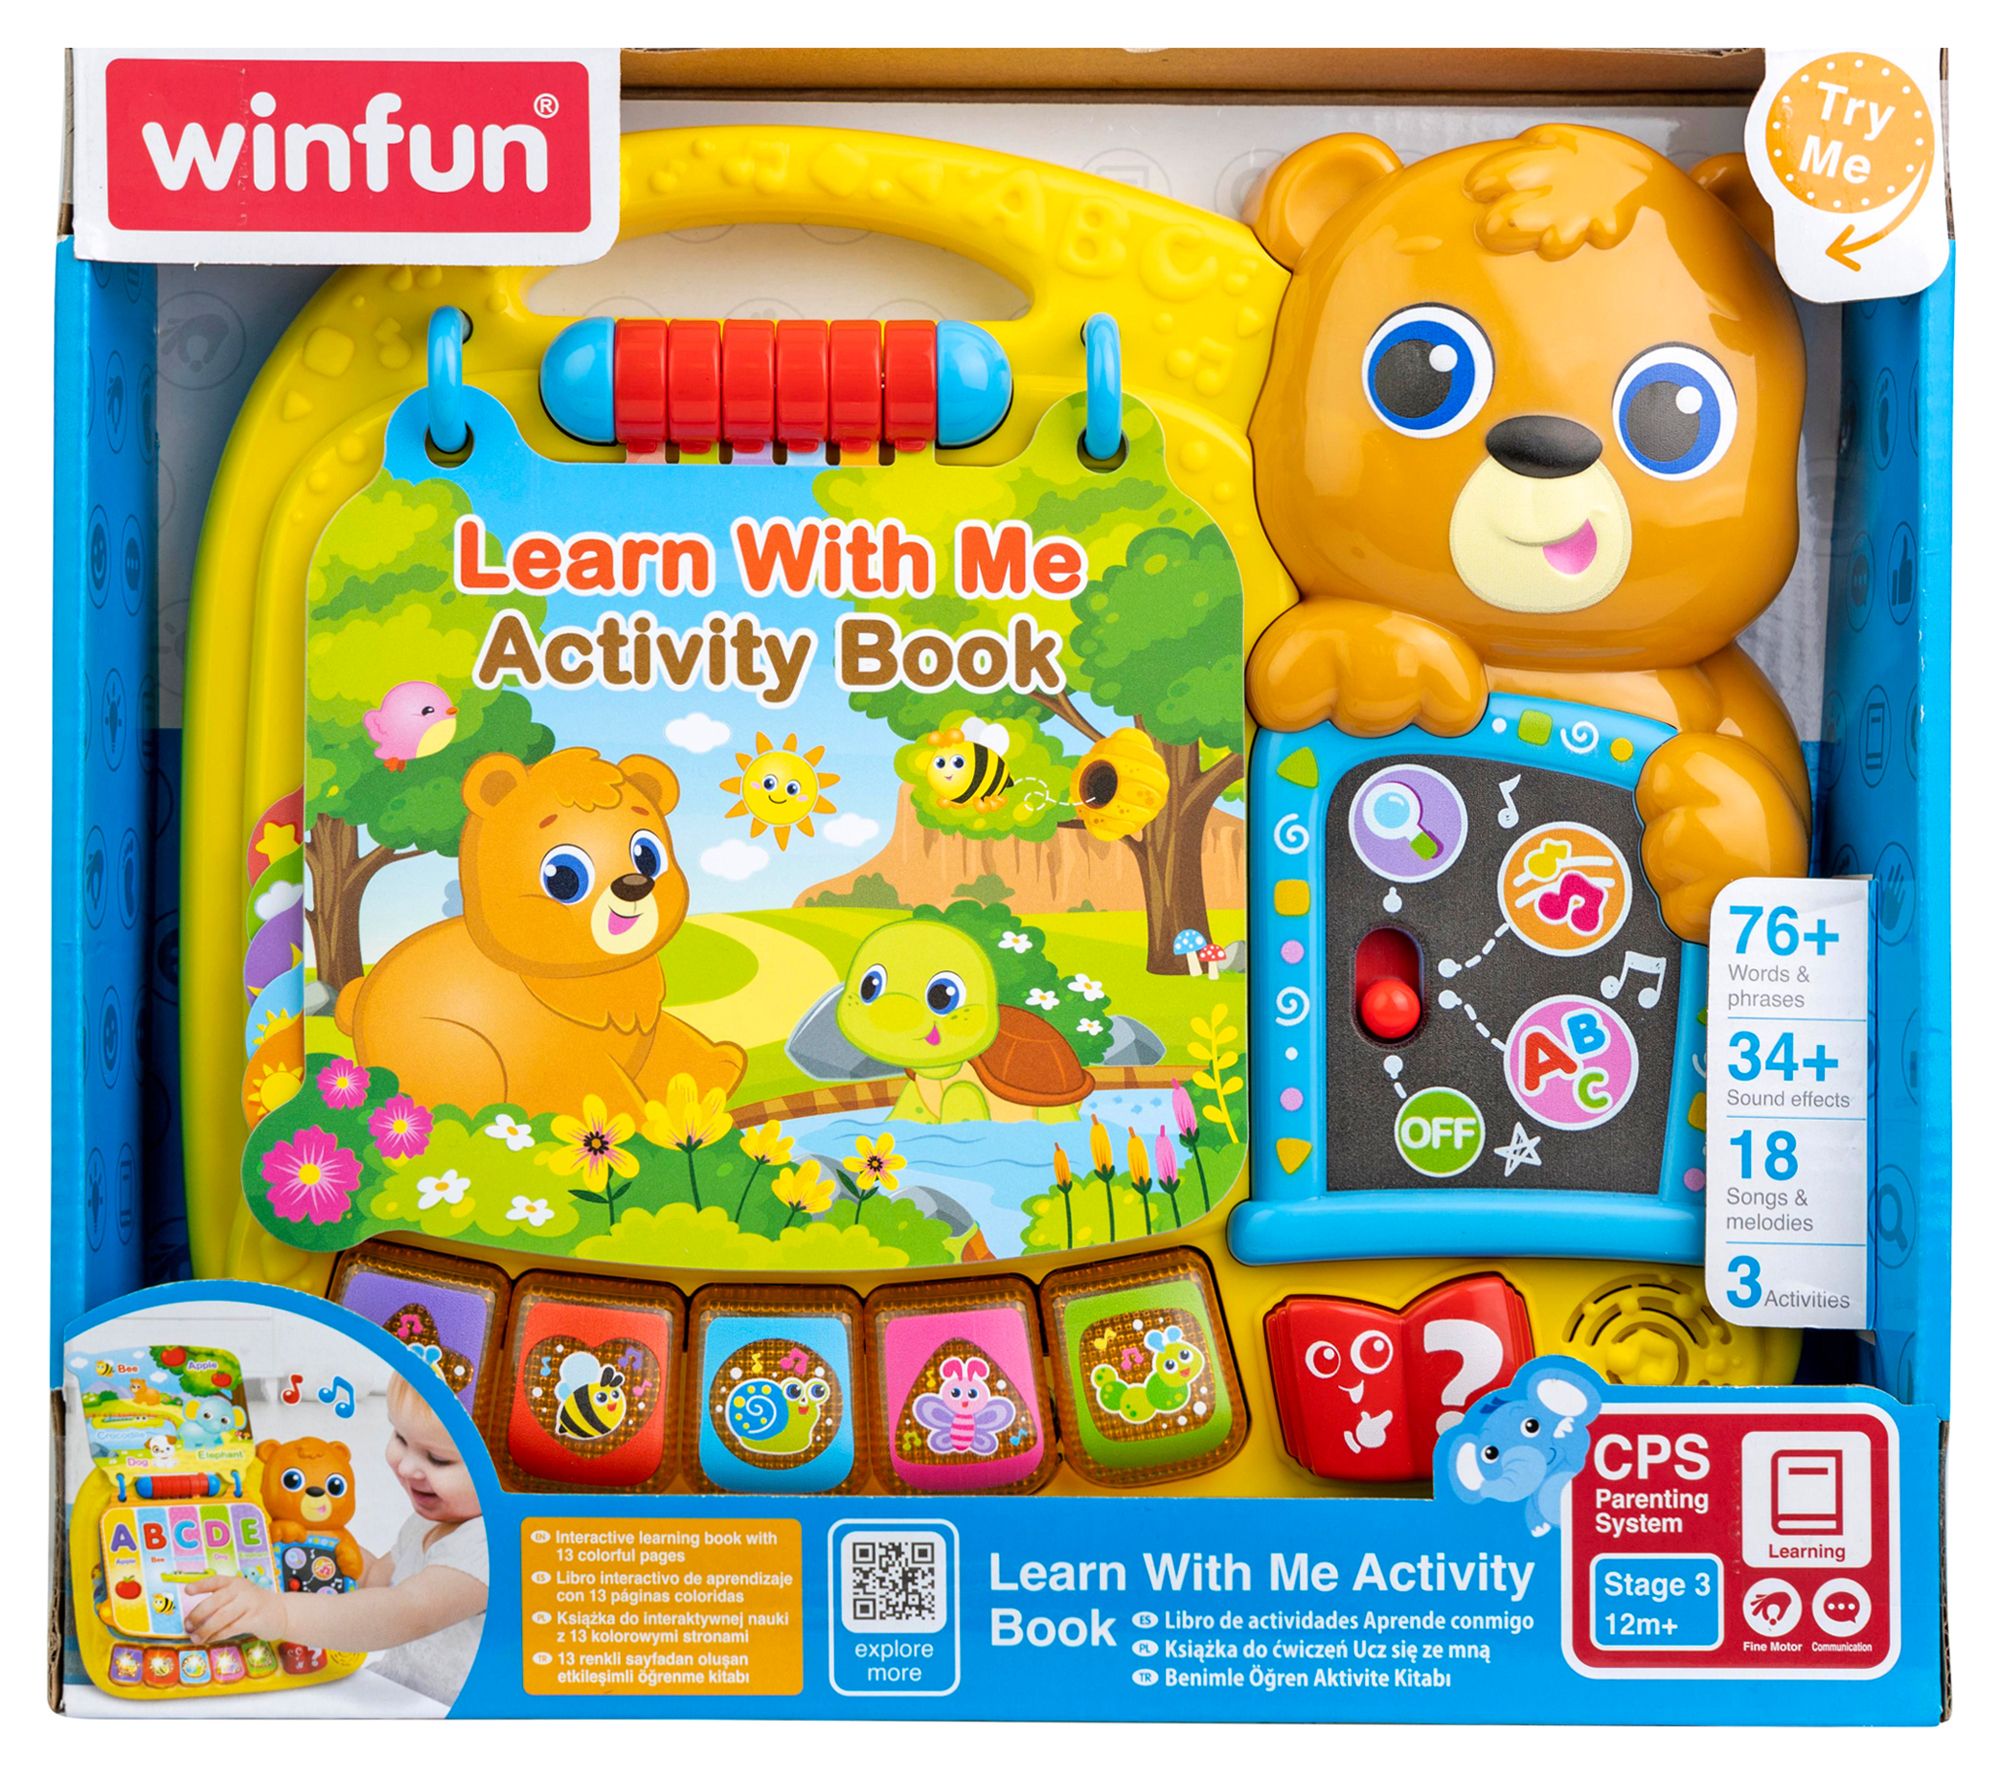 Winfun Learn with Me Activity Book - QVC.com